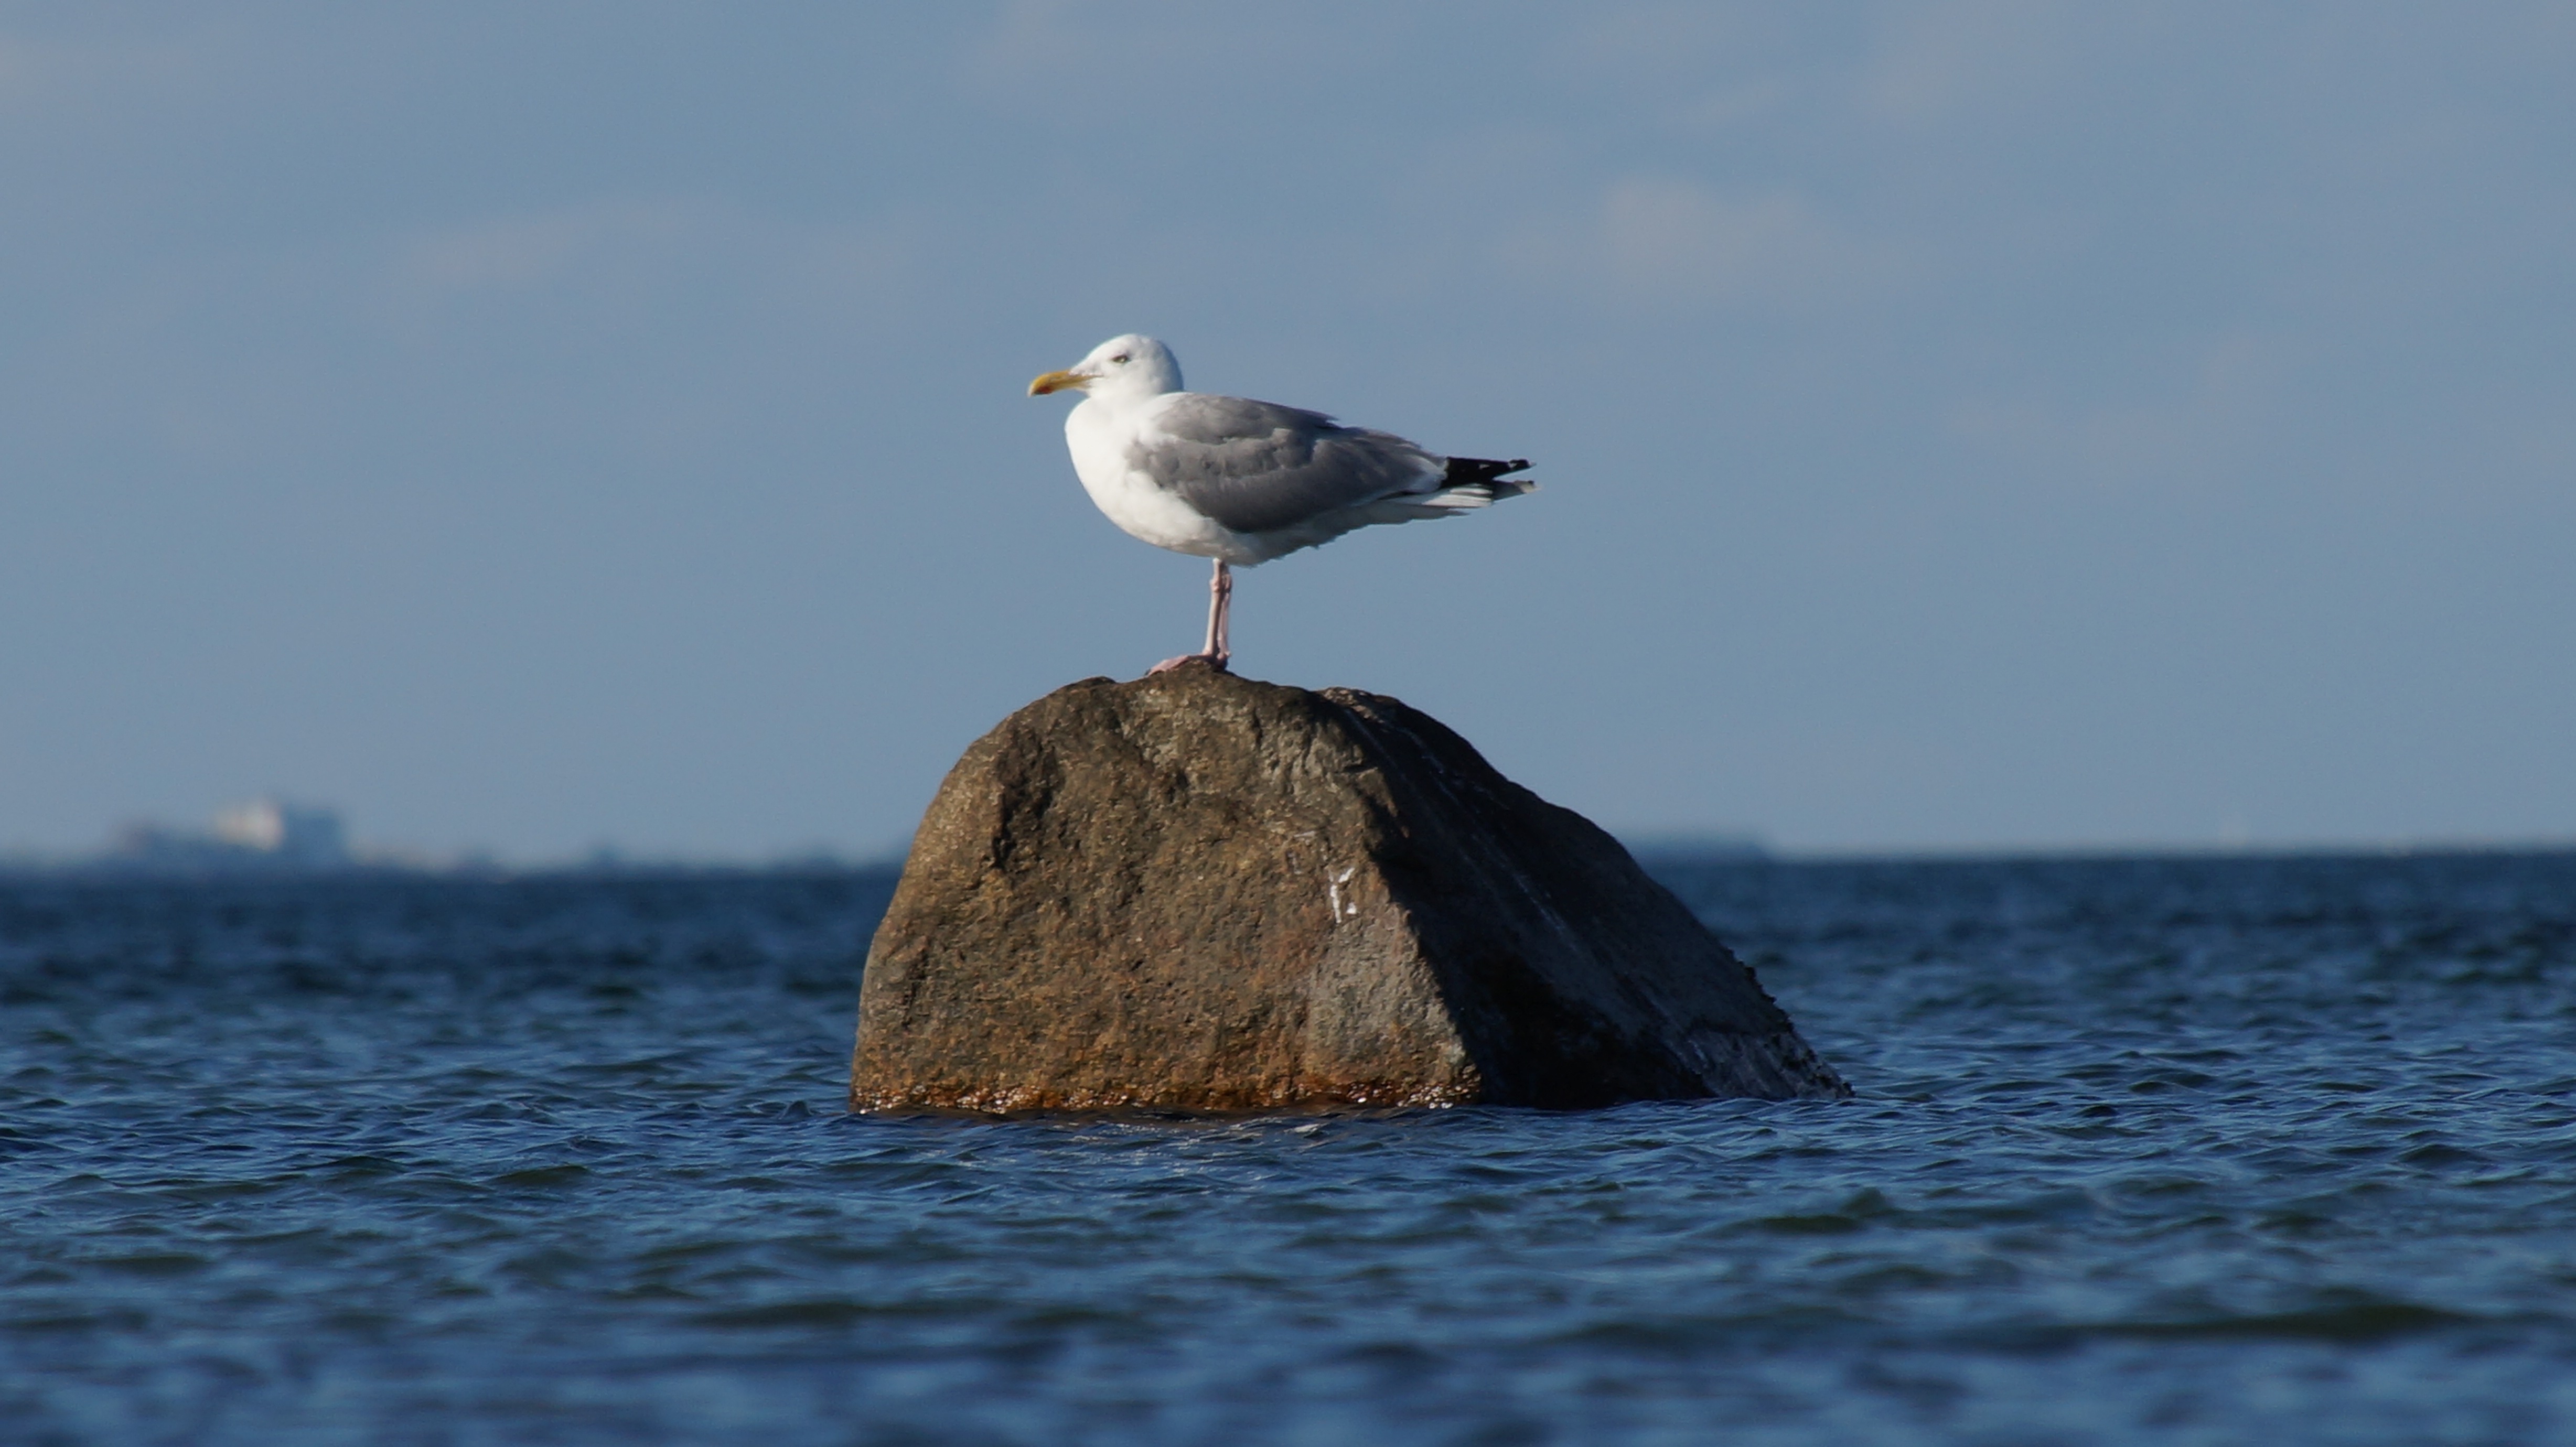 white and gray seagull